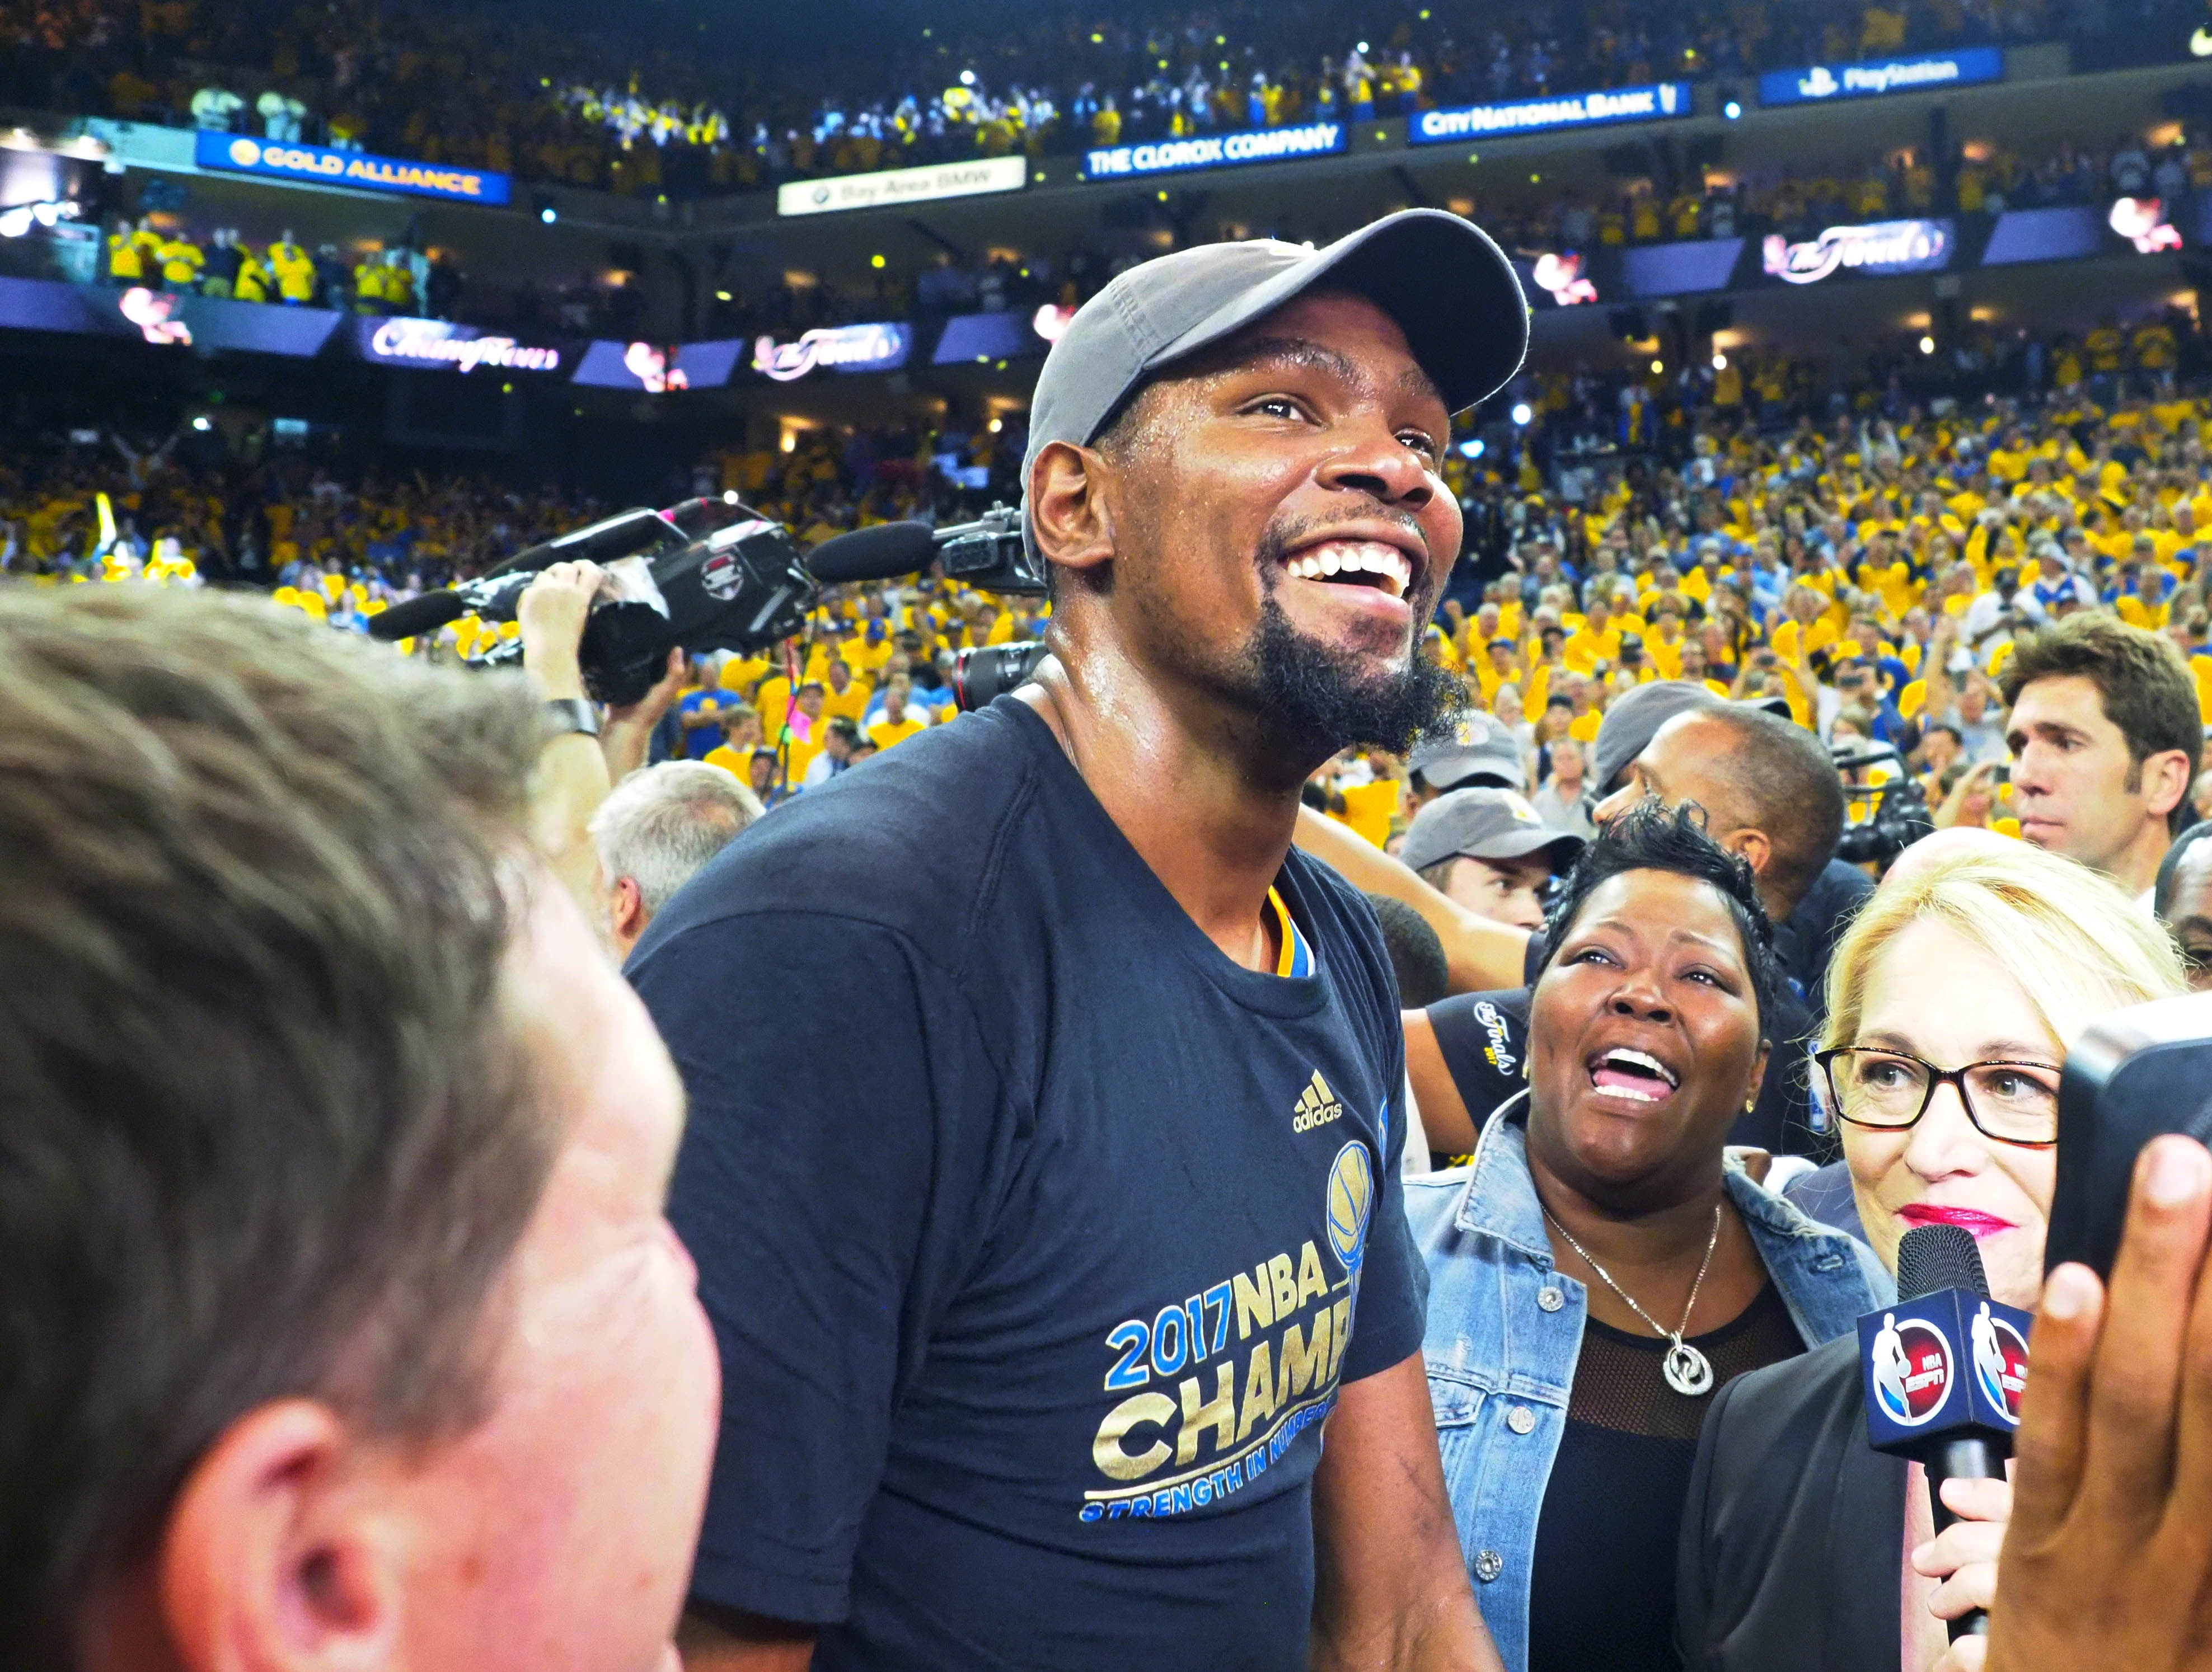 Jun 12, 2017; Oakland, CA, USA; Golden State Warriors forward Kevin Durant (35) celebrates after beating the Cleveland Cavaliers in game five of the 2017 NBA Finals at Oracle Arena. Mandatory Credit: Kelley L Cox-USA TODAY Sports